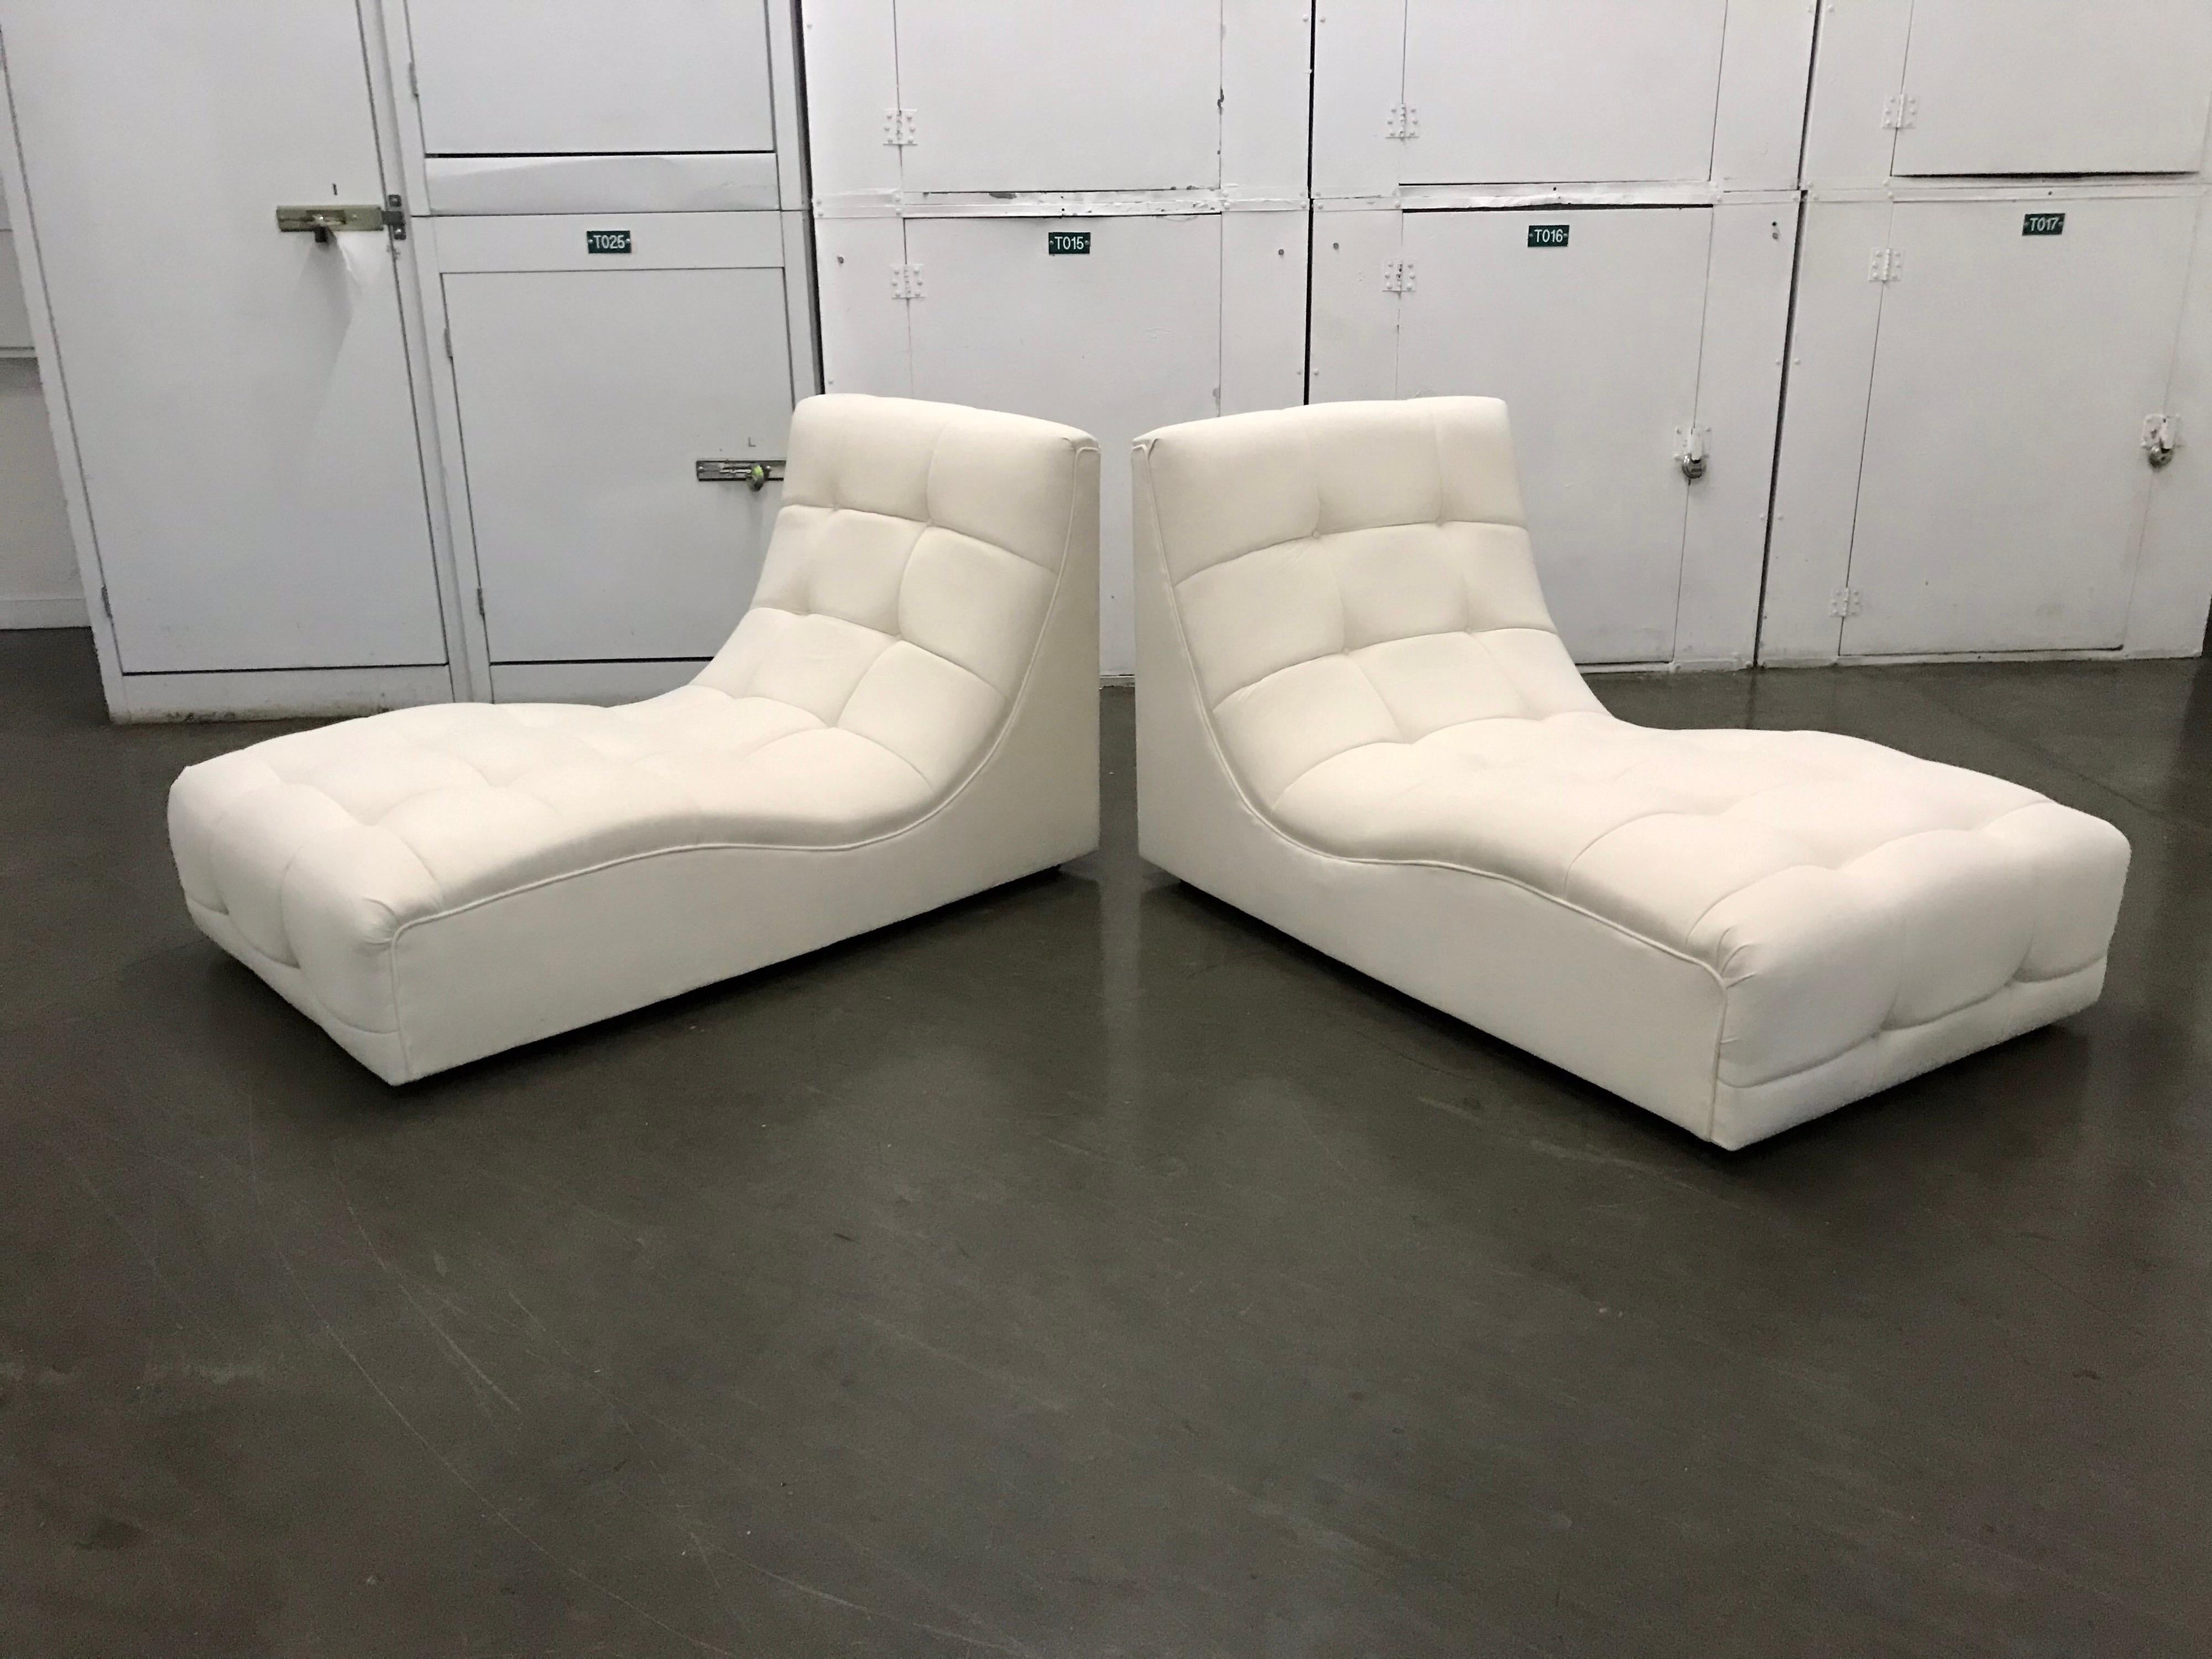 Handsome pair
Wood construction with wood castors and soft cream hue fabric
Reupholstered in the same window pane manner as found
Great for a living room or lanai etcetra.

 